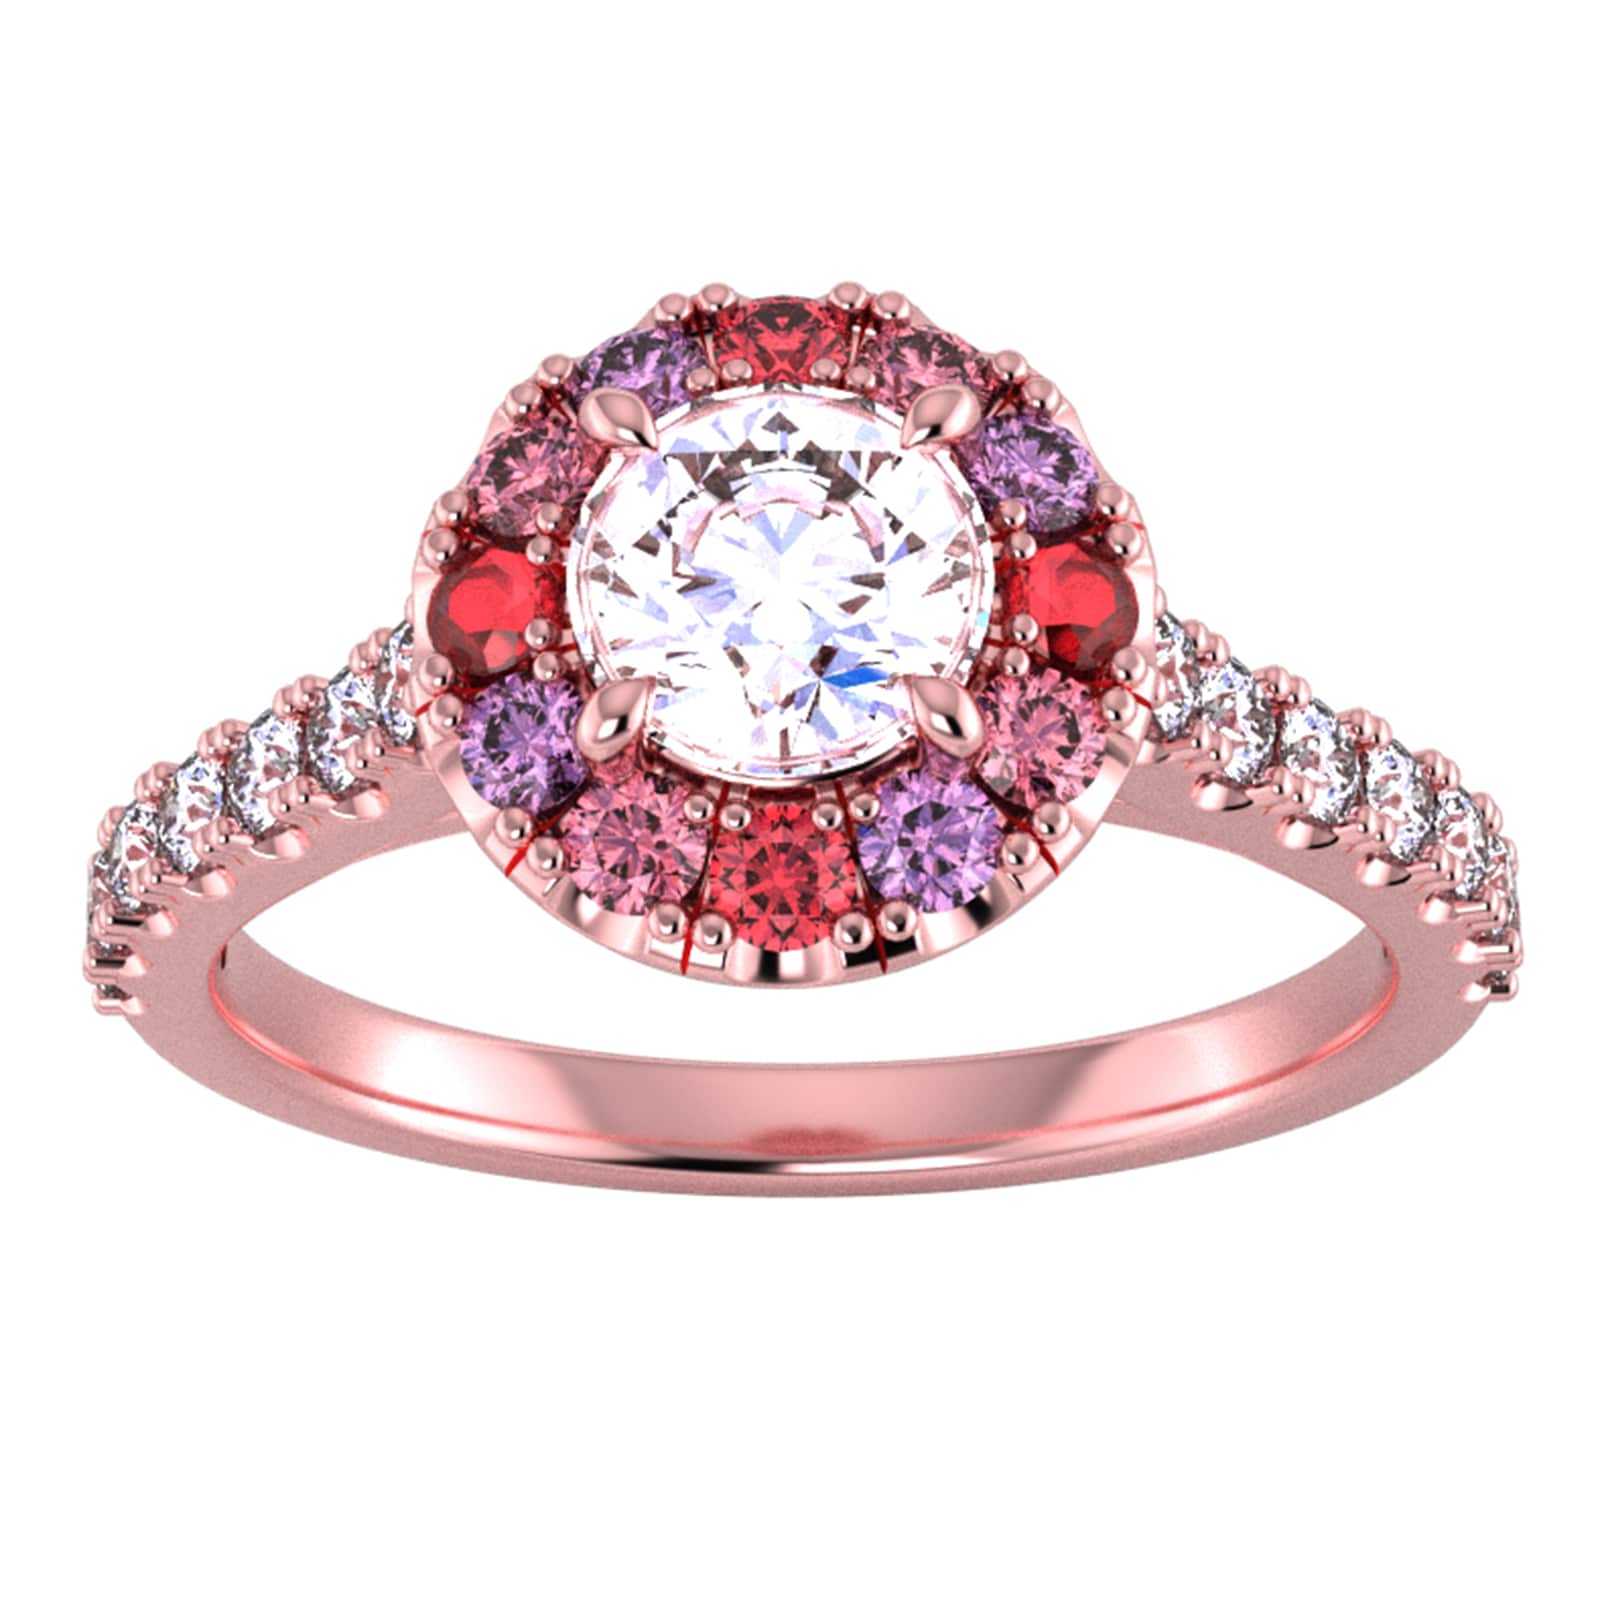 18ct Rose Gold Diamond & Pink, Red, Purple Sapphire Halo Ring - Ring Size V.5